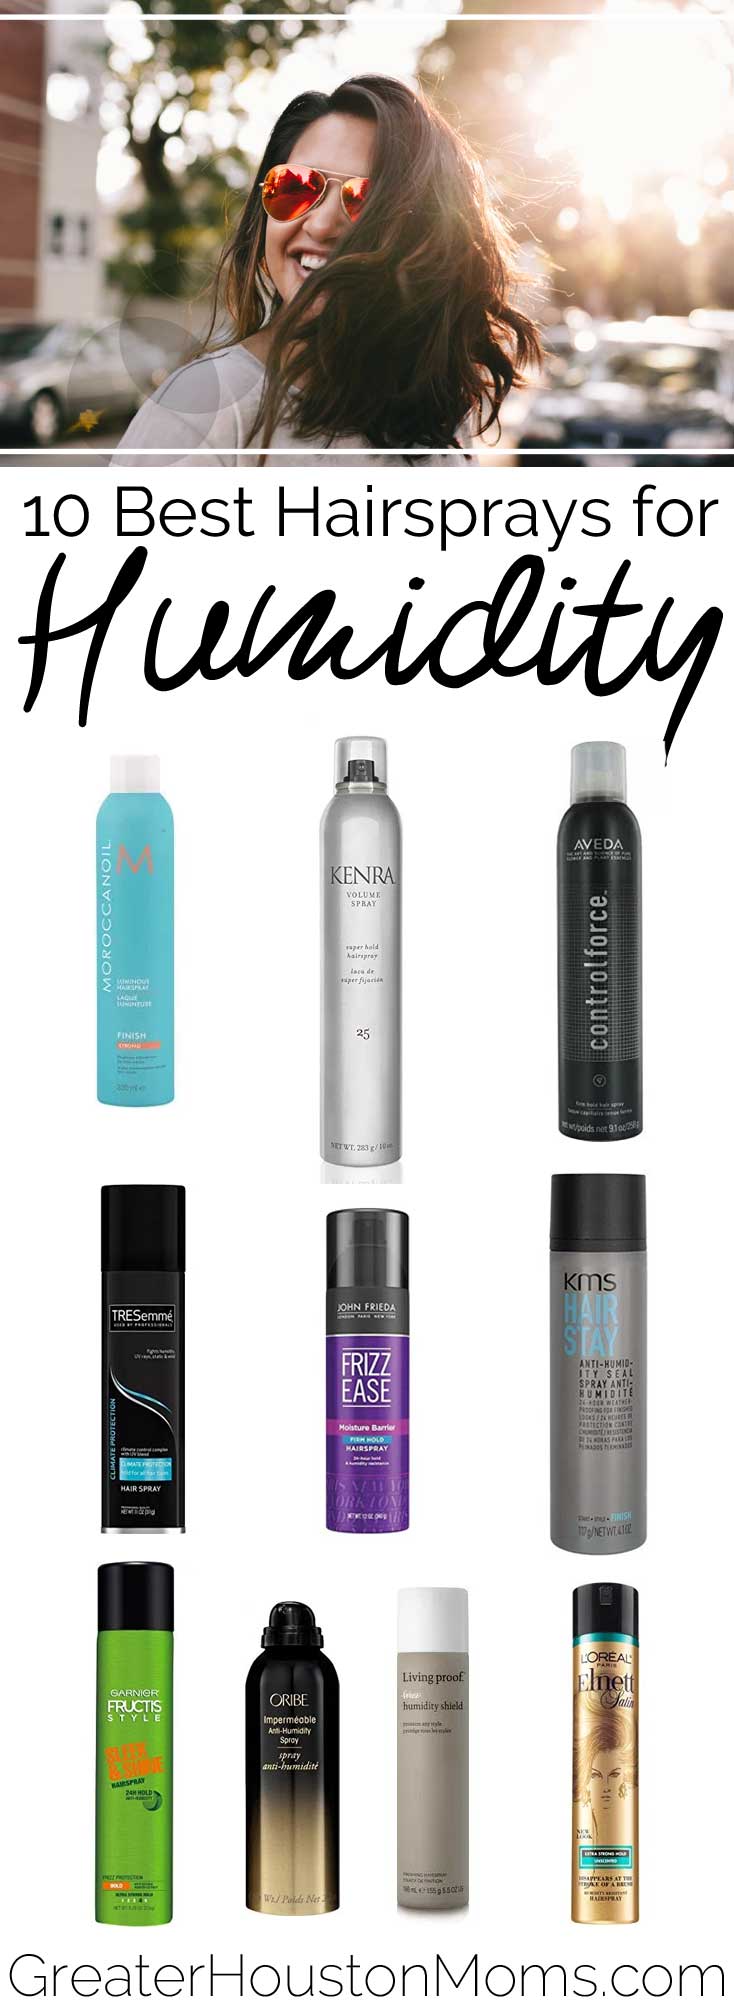 10 Best Hairsprays for Houston Humidity - Greater Houston Moms